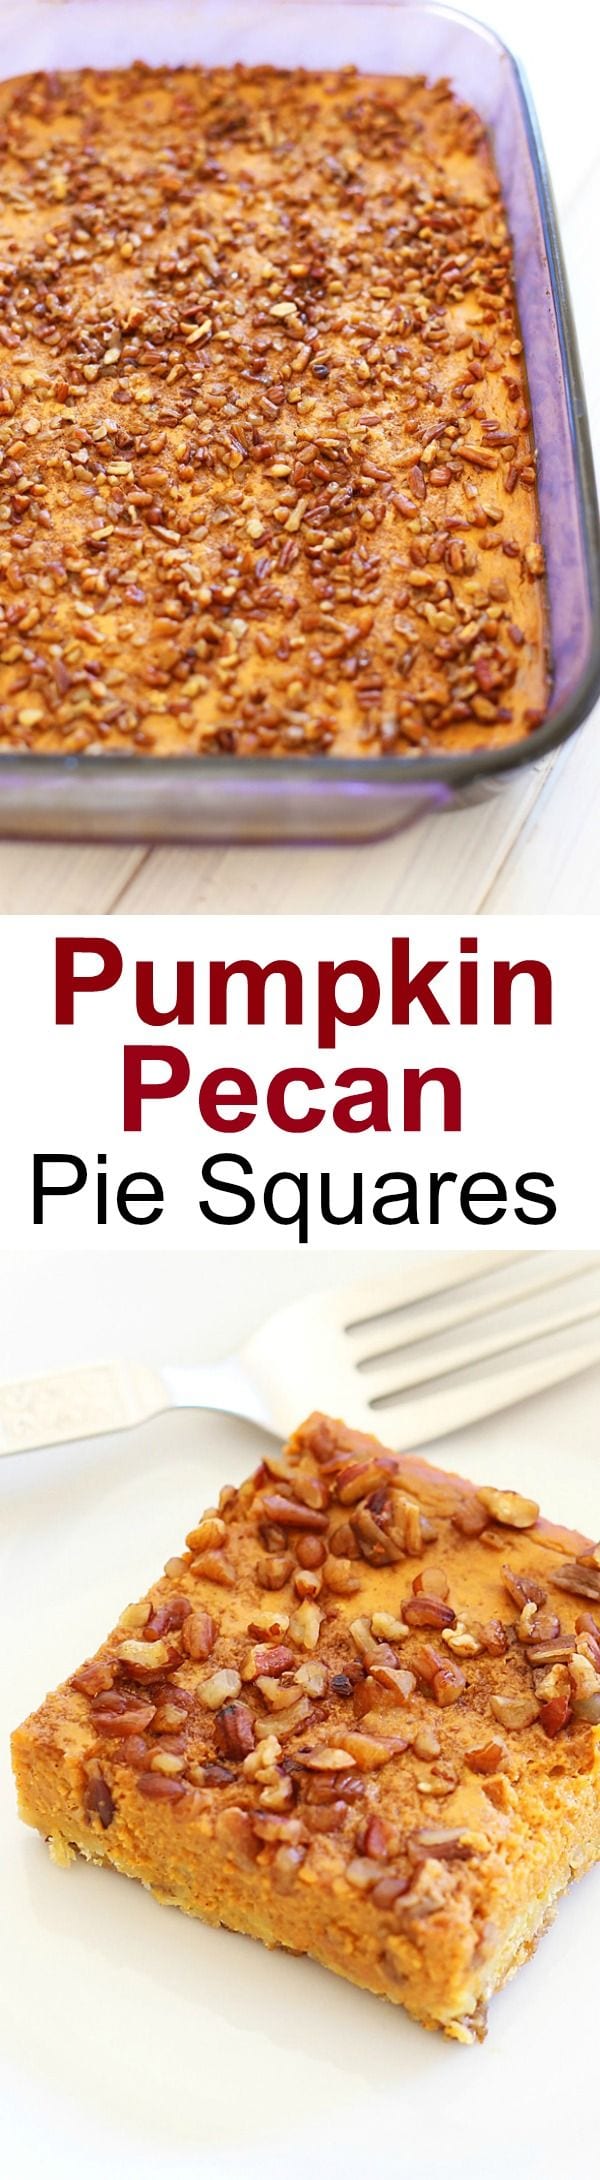 Pumpkin Pecan Pie Squares – sweet, nutty, crumbly pumpkin dessert topped with toasted pecans, so good, addictive you won't stop eating! | rasamalaysia.com